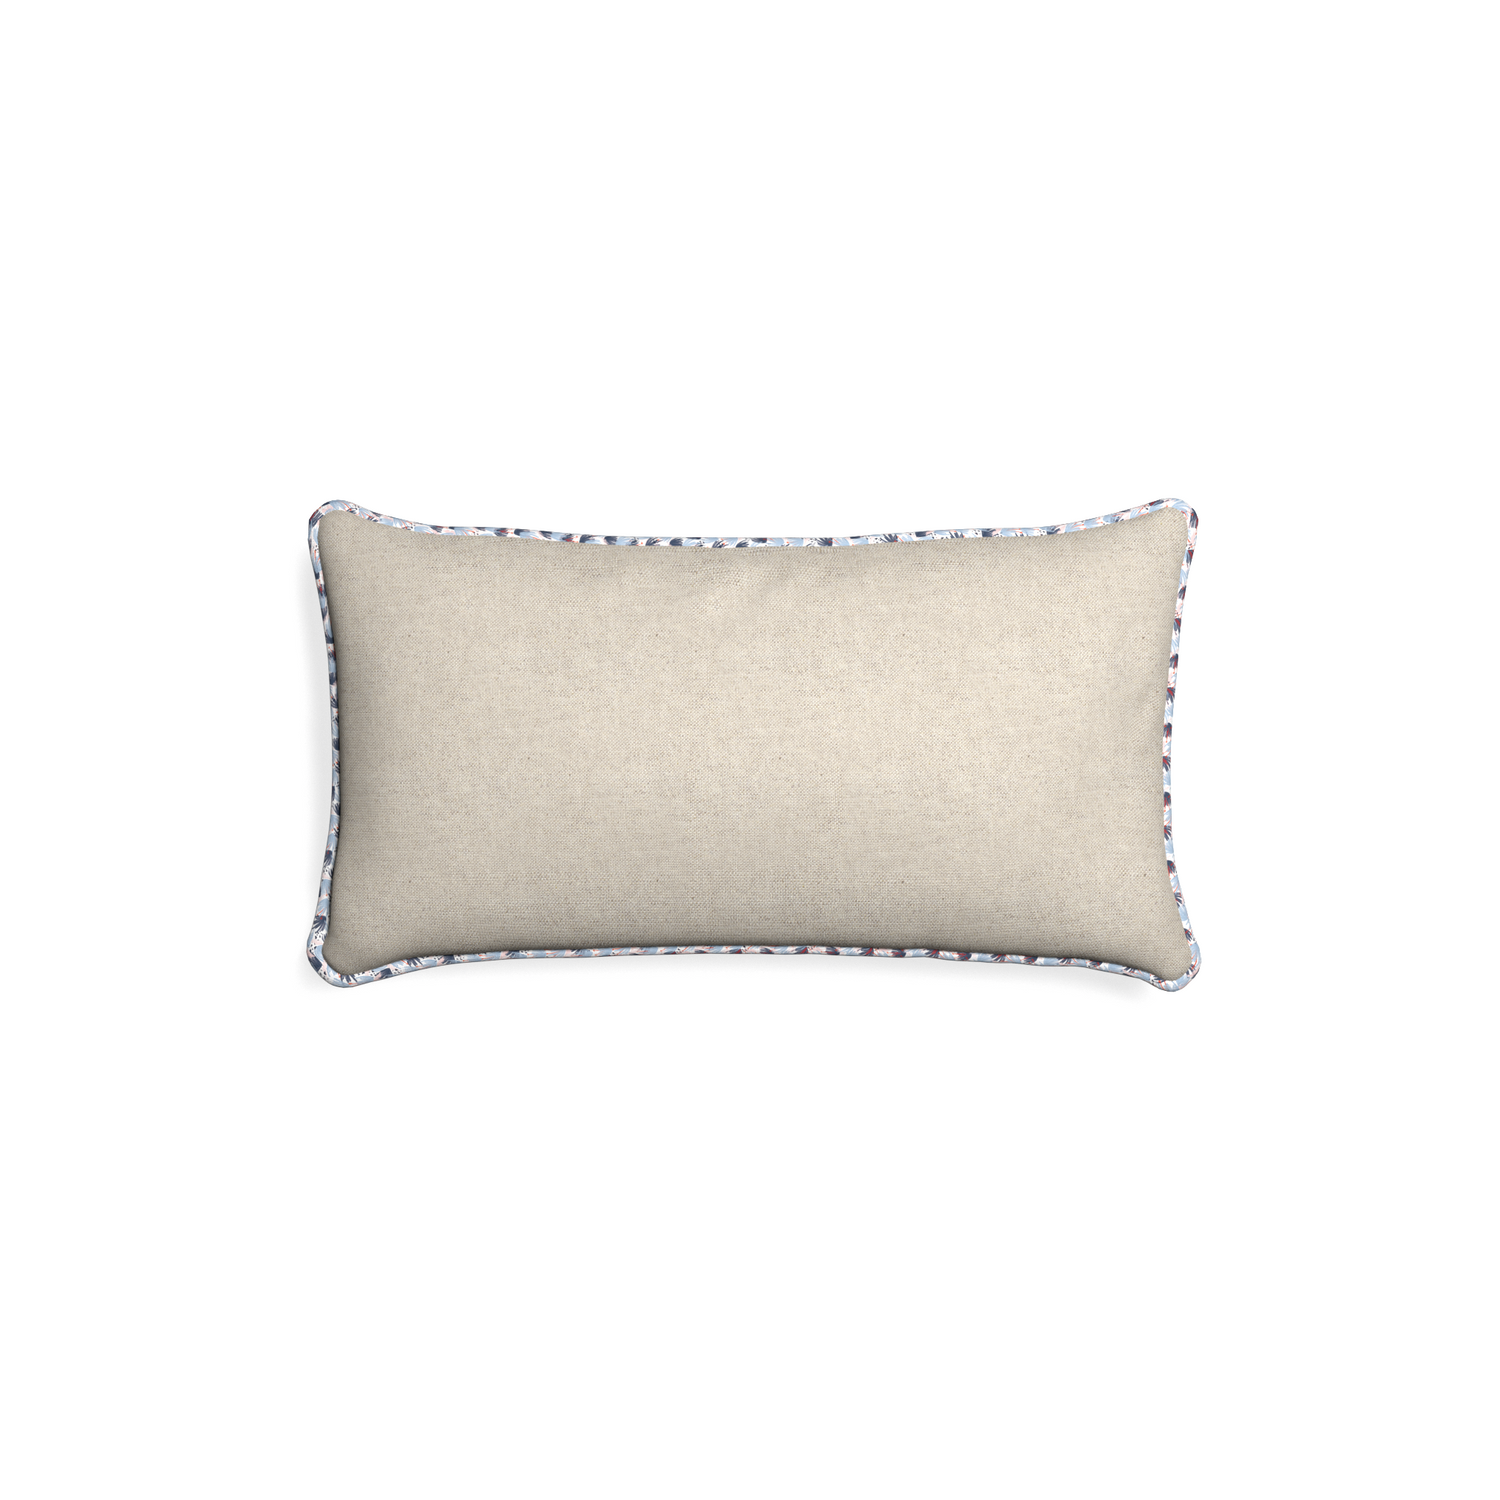 Petite-lumbar oat custom light brownpillow with e piping on white background